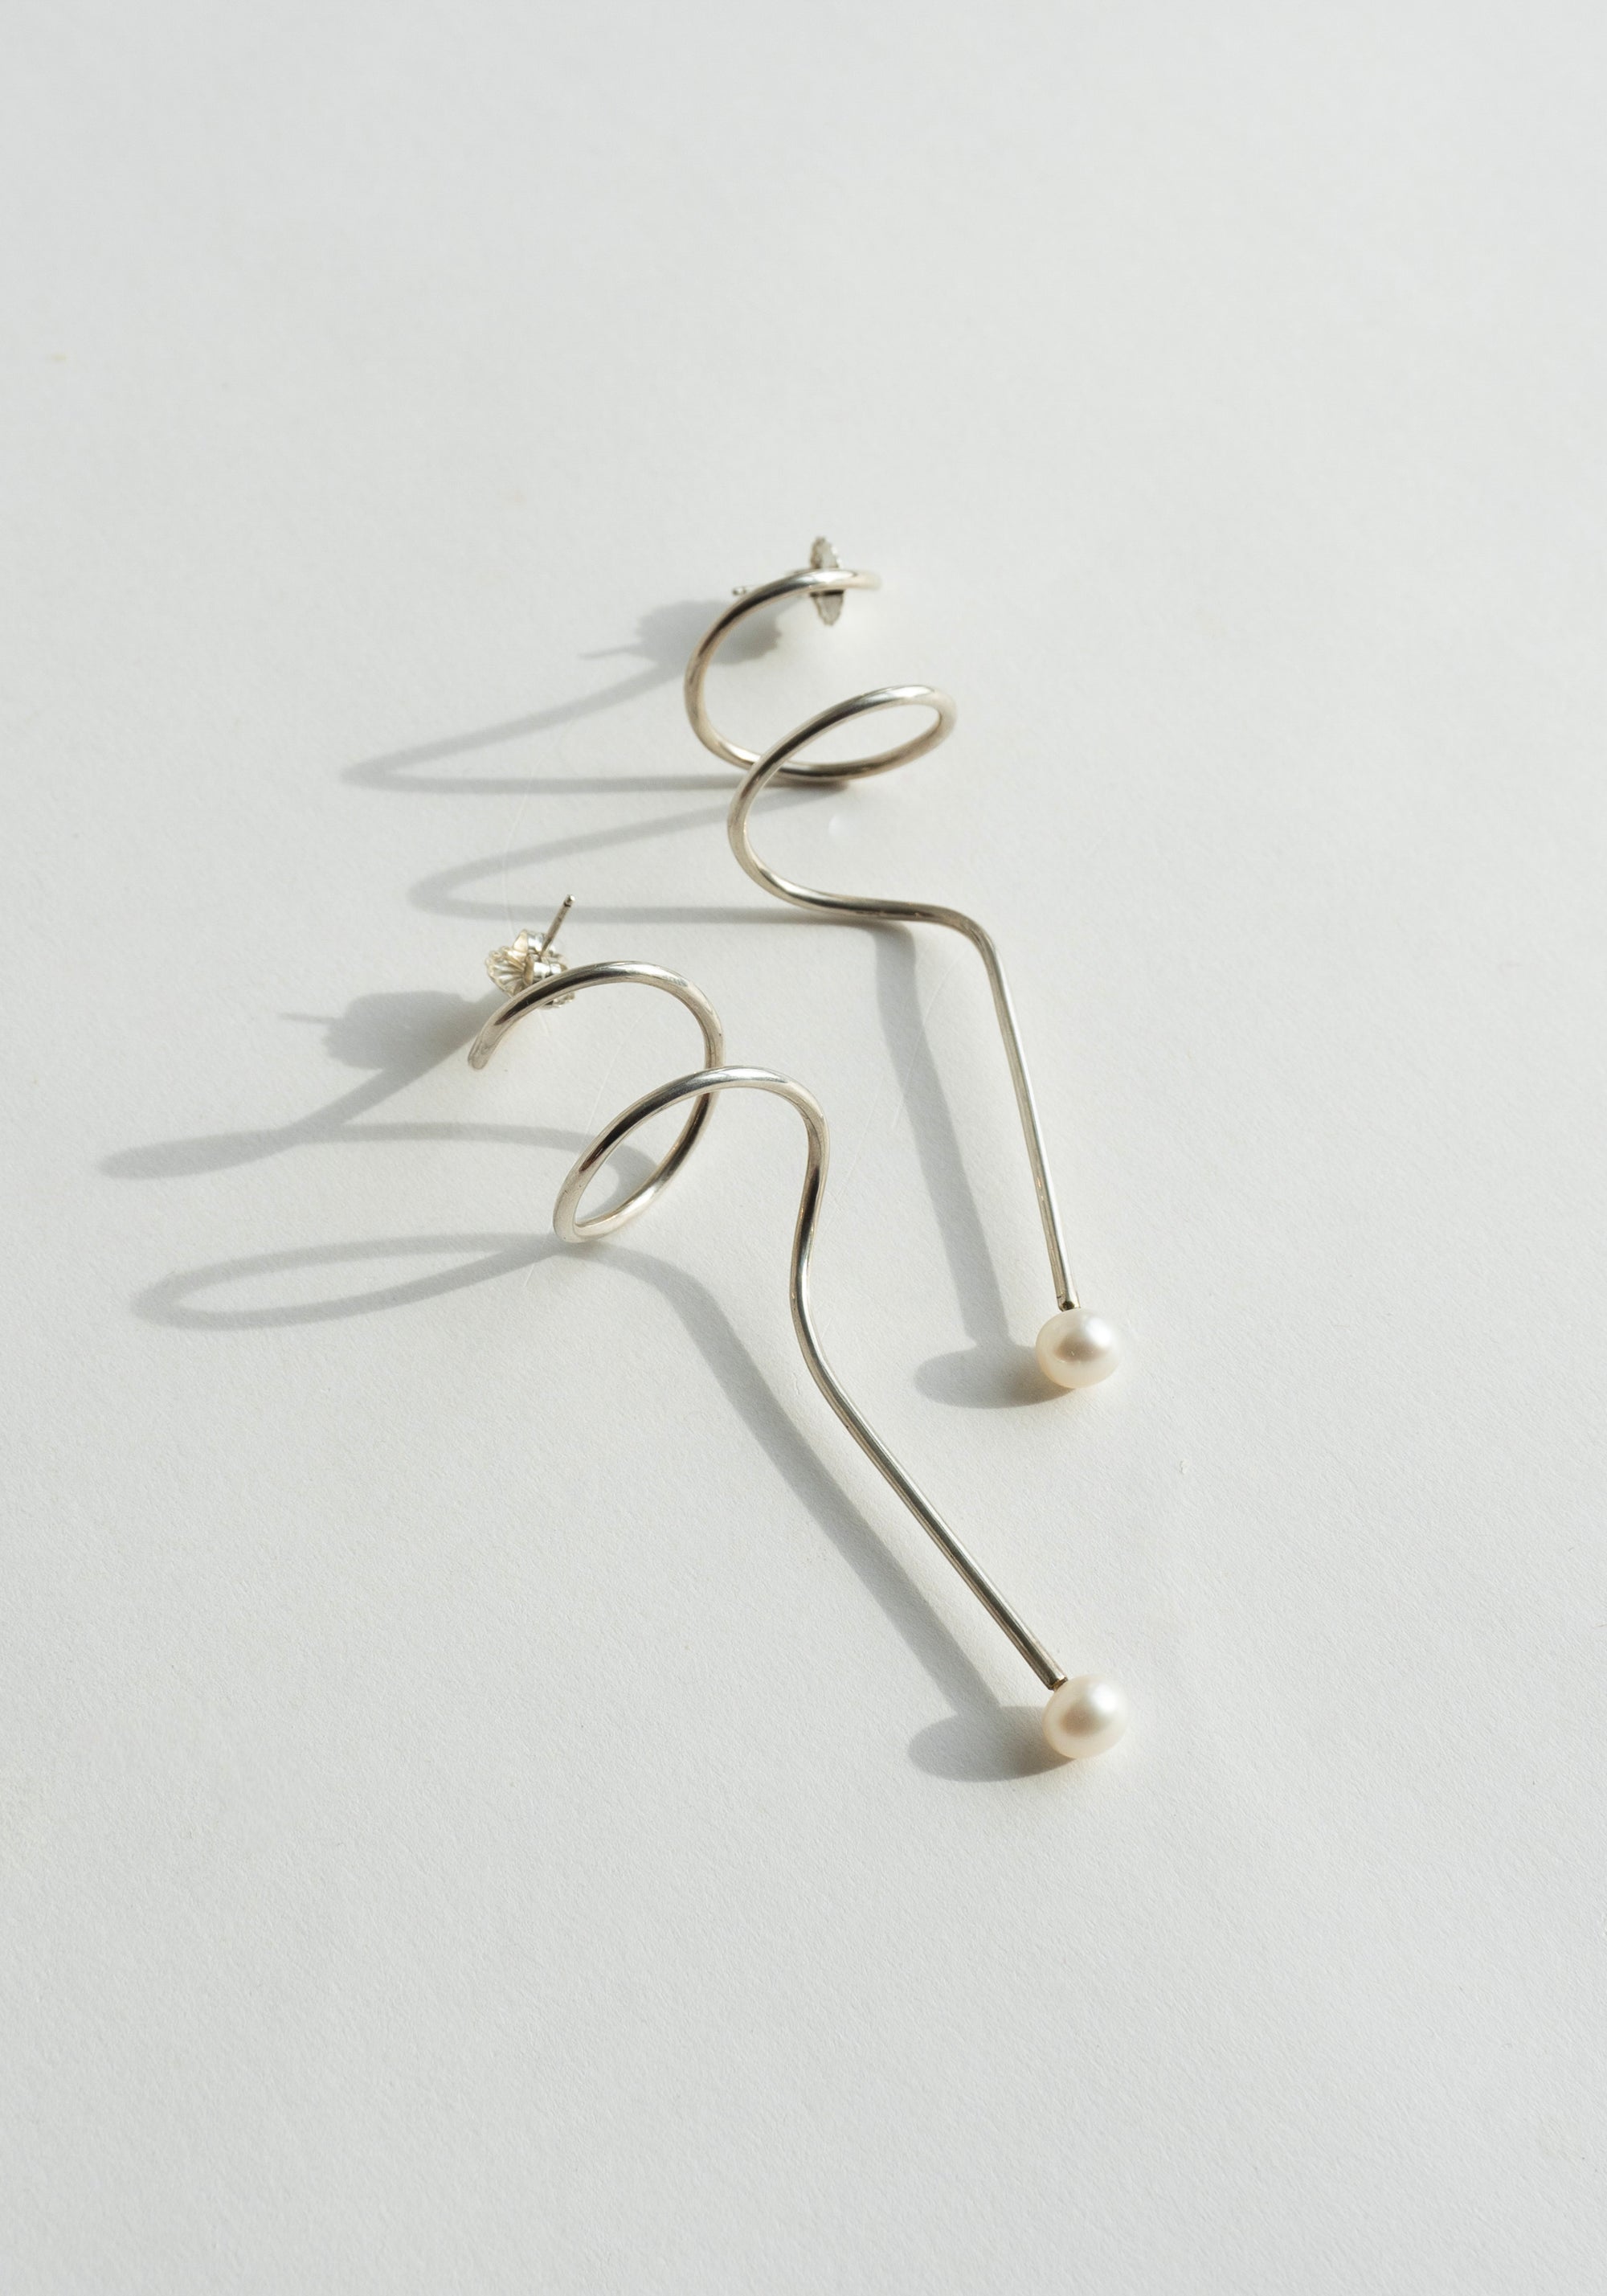 Danica Stamentic Long Spiral Drop Earrings with Pearls